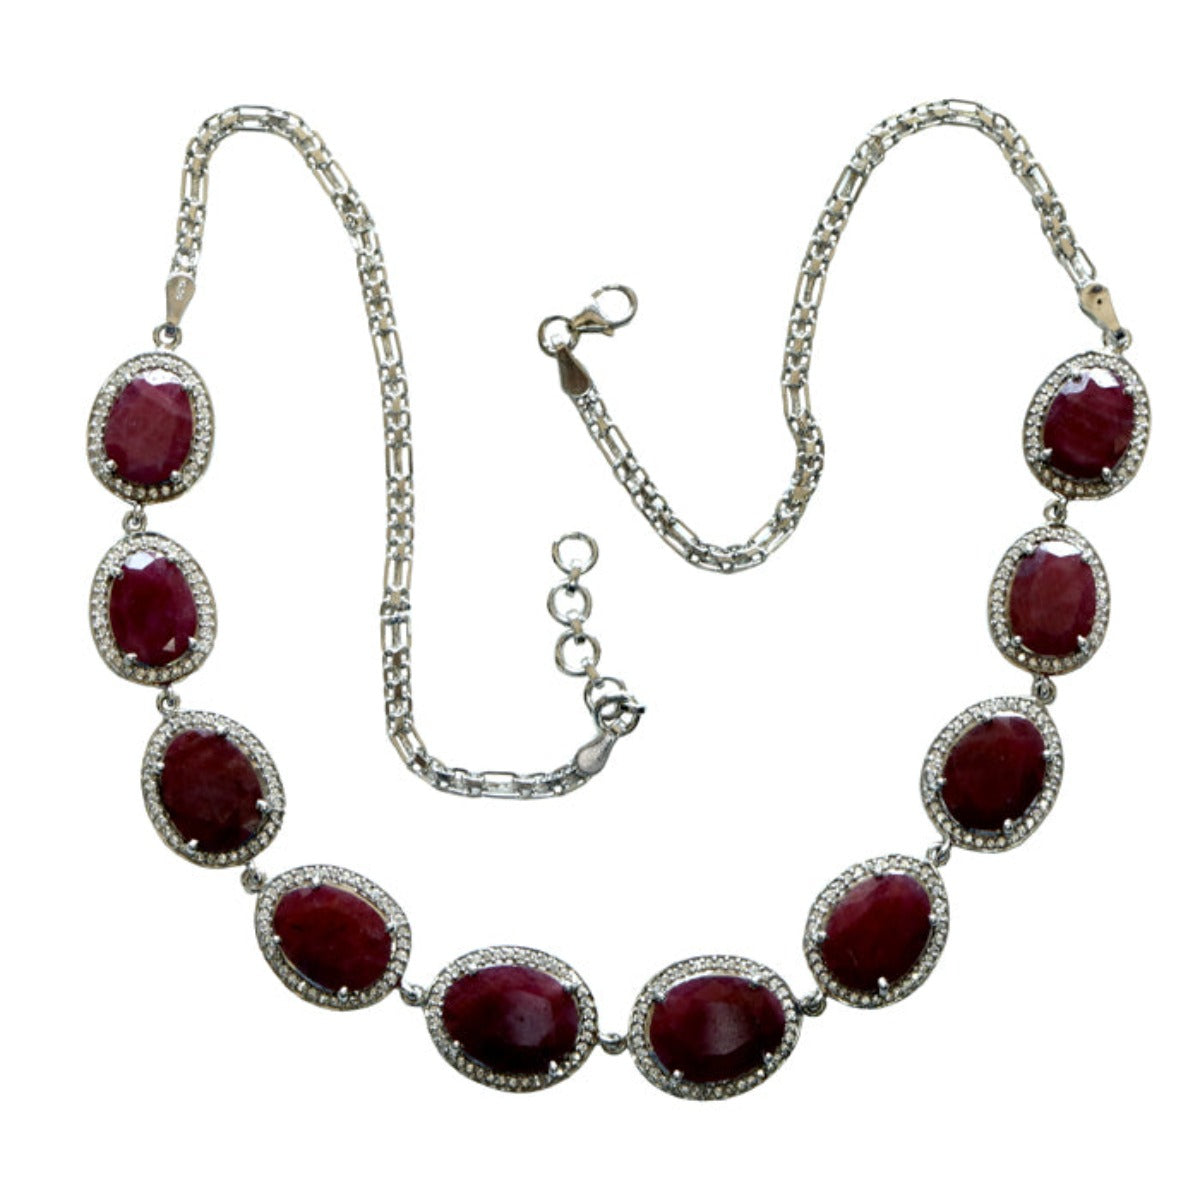 Red Ruby Necklace. Genuine Ruby and Chain Necklace. AzizaJewelry. – Aziza  Love